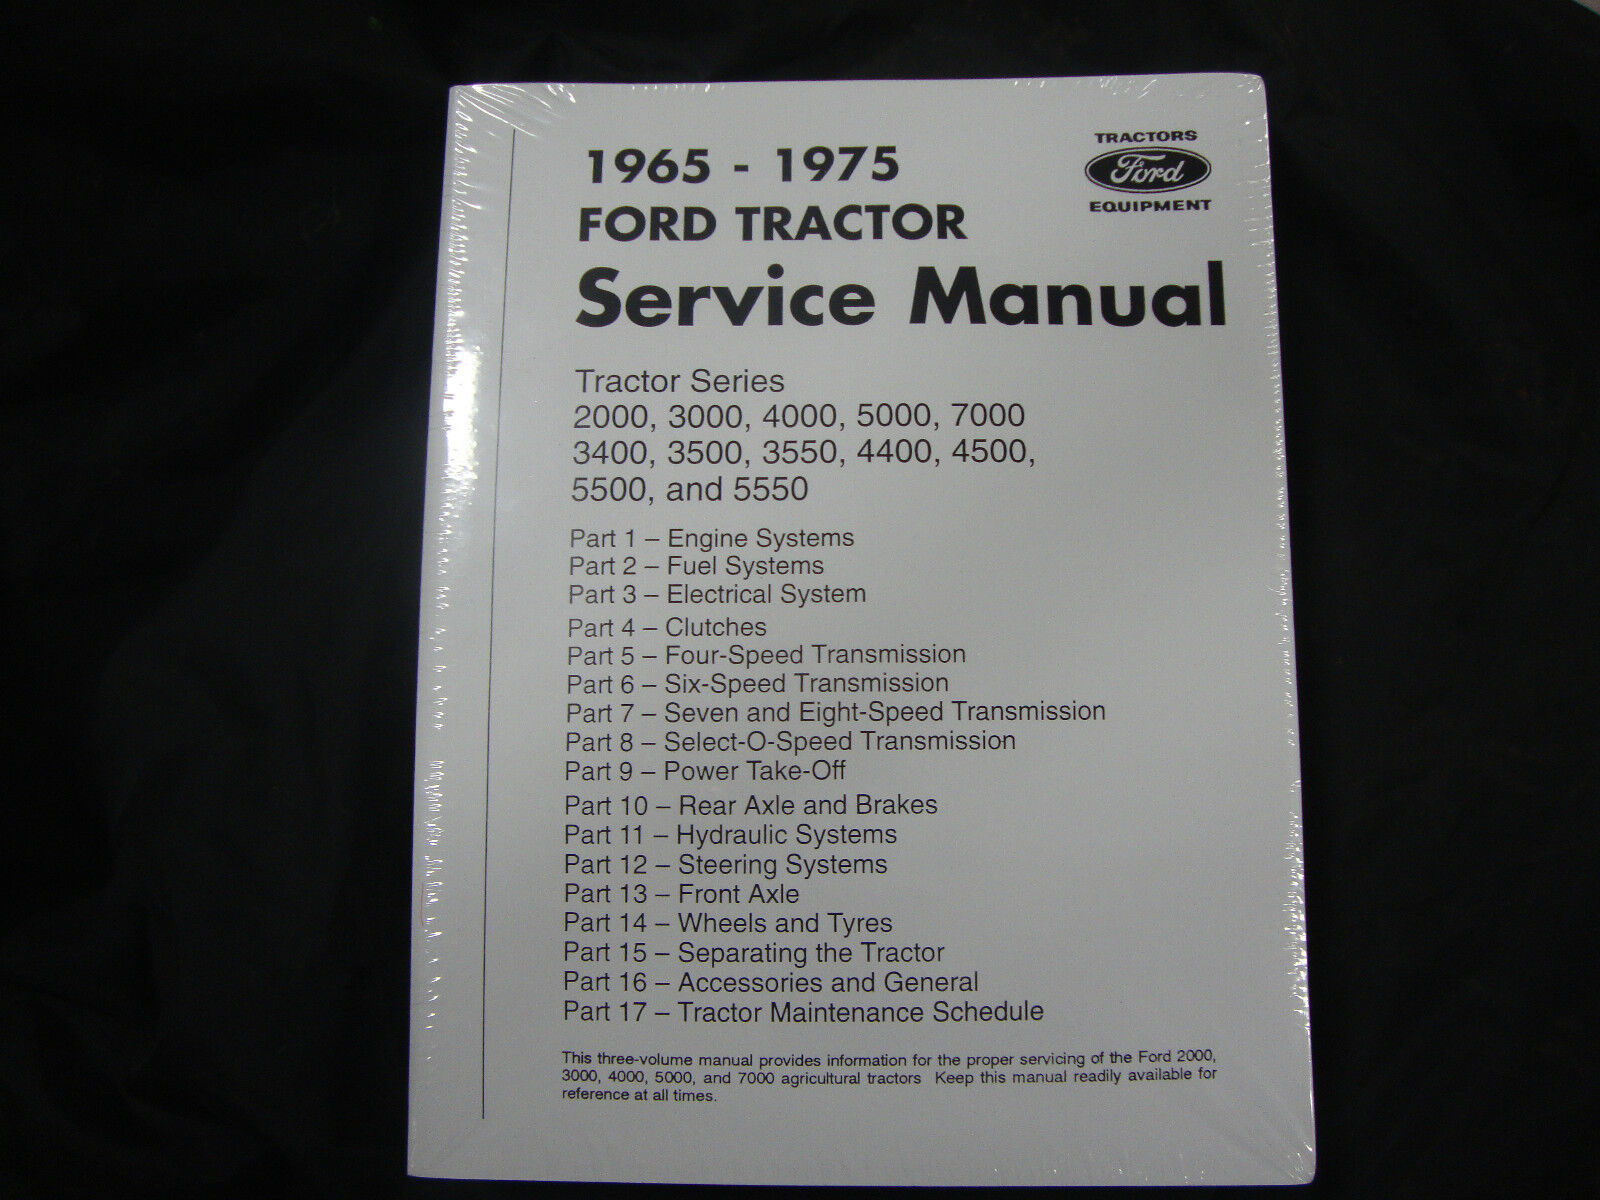 2000 3000 2400 4000 4400 4500 5000 5500 7000 FORD TRACTOR SERVICE MANUAL 